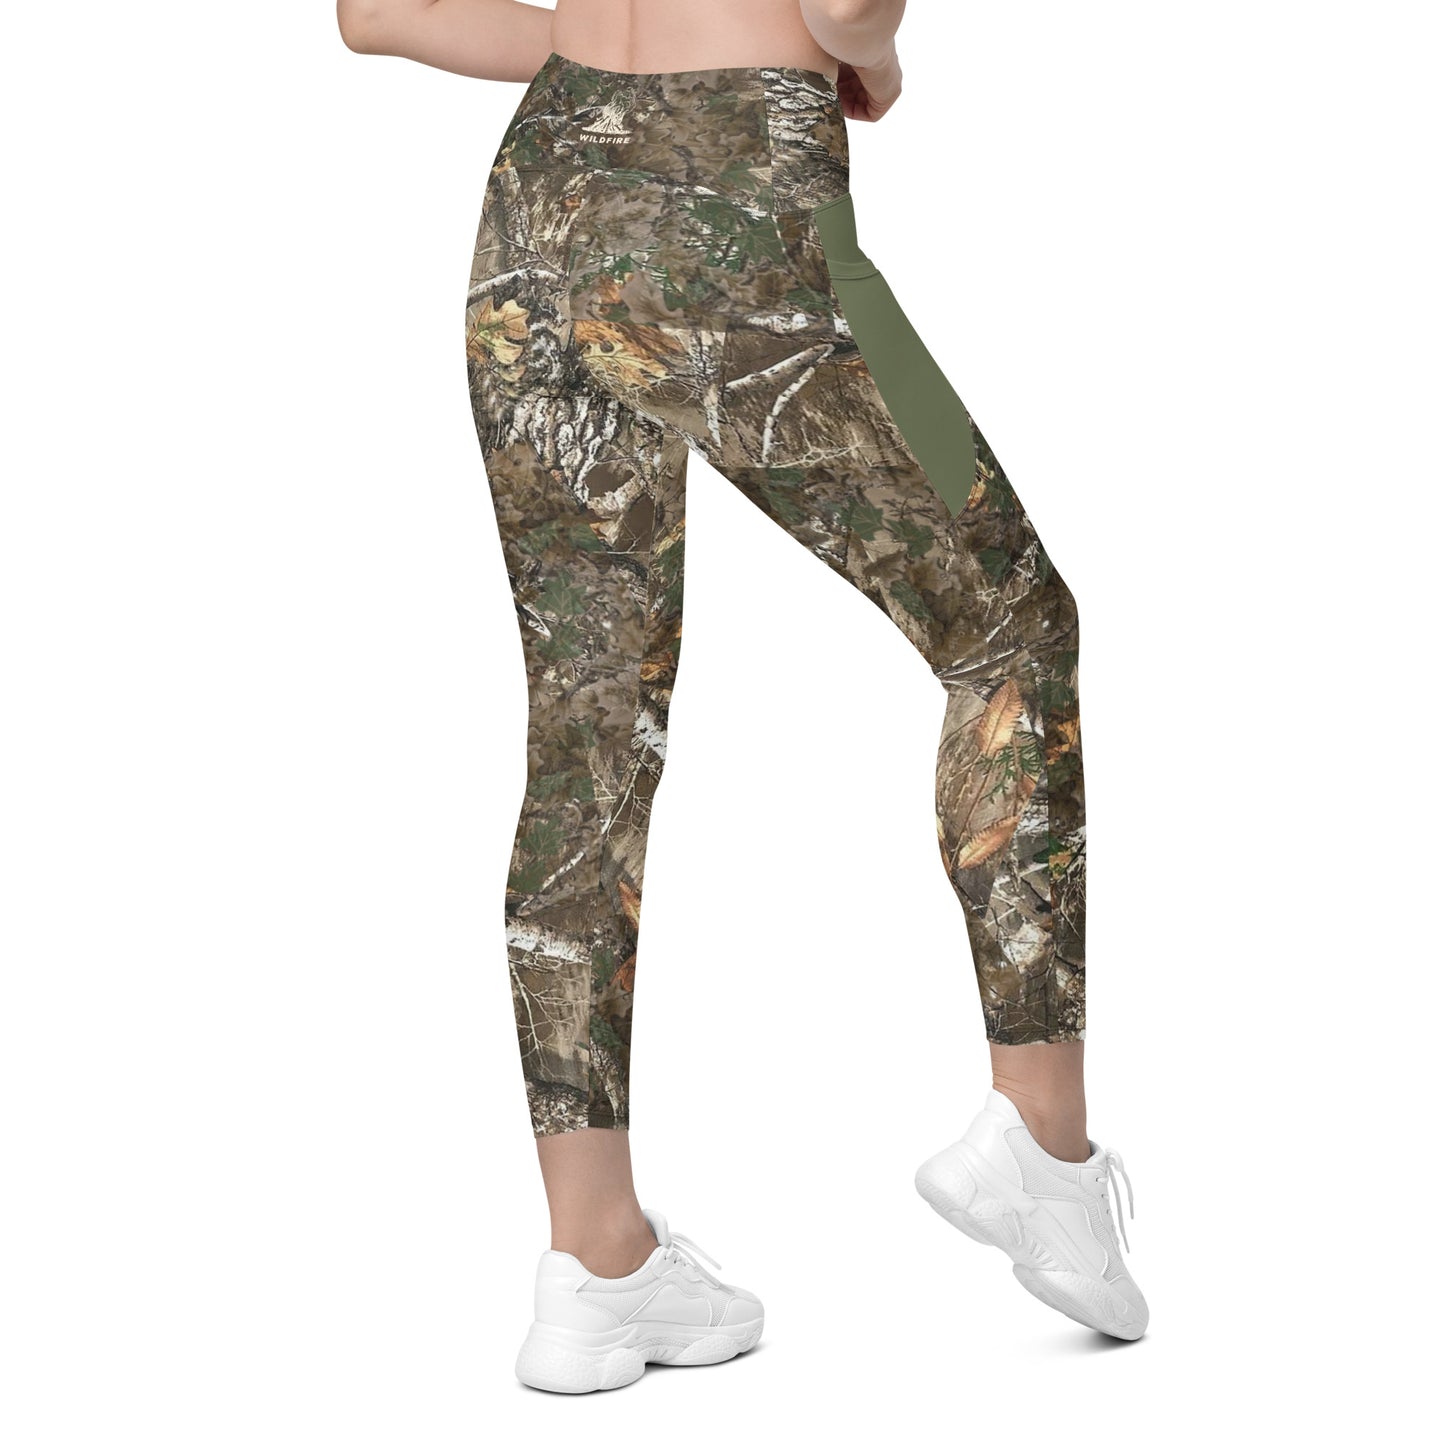 Wildfire Cigars Camouflage and military green activewear leggings facing the back right